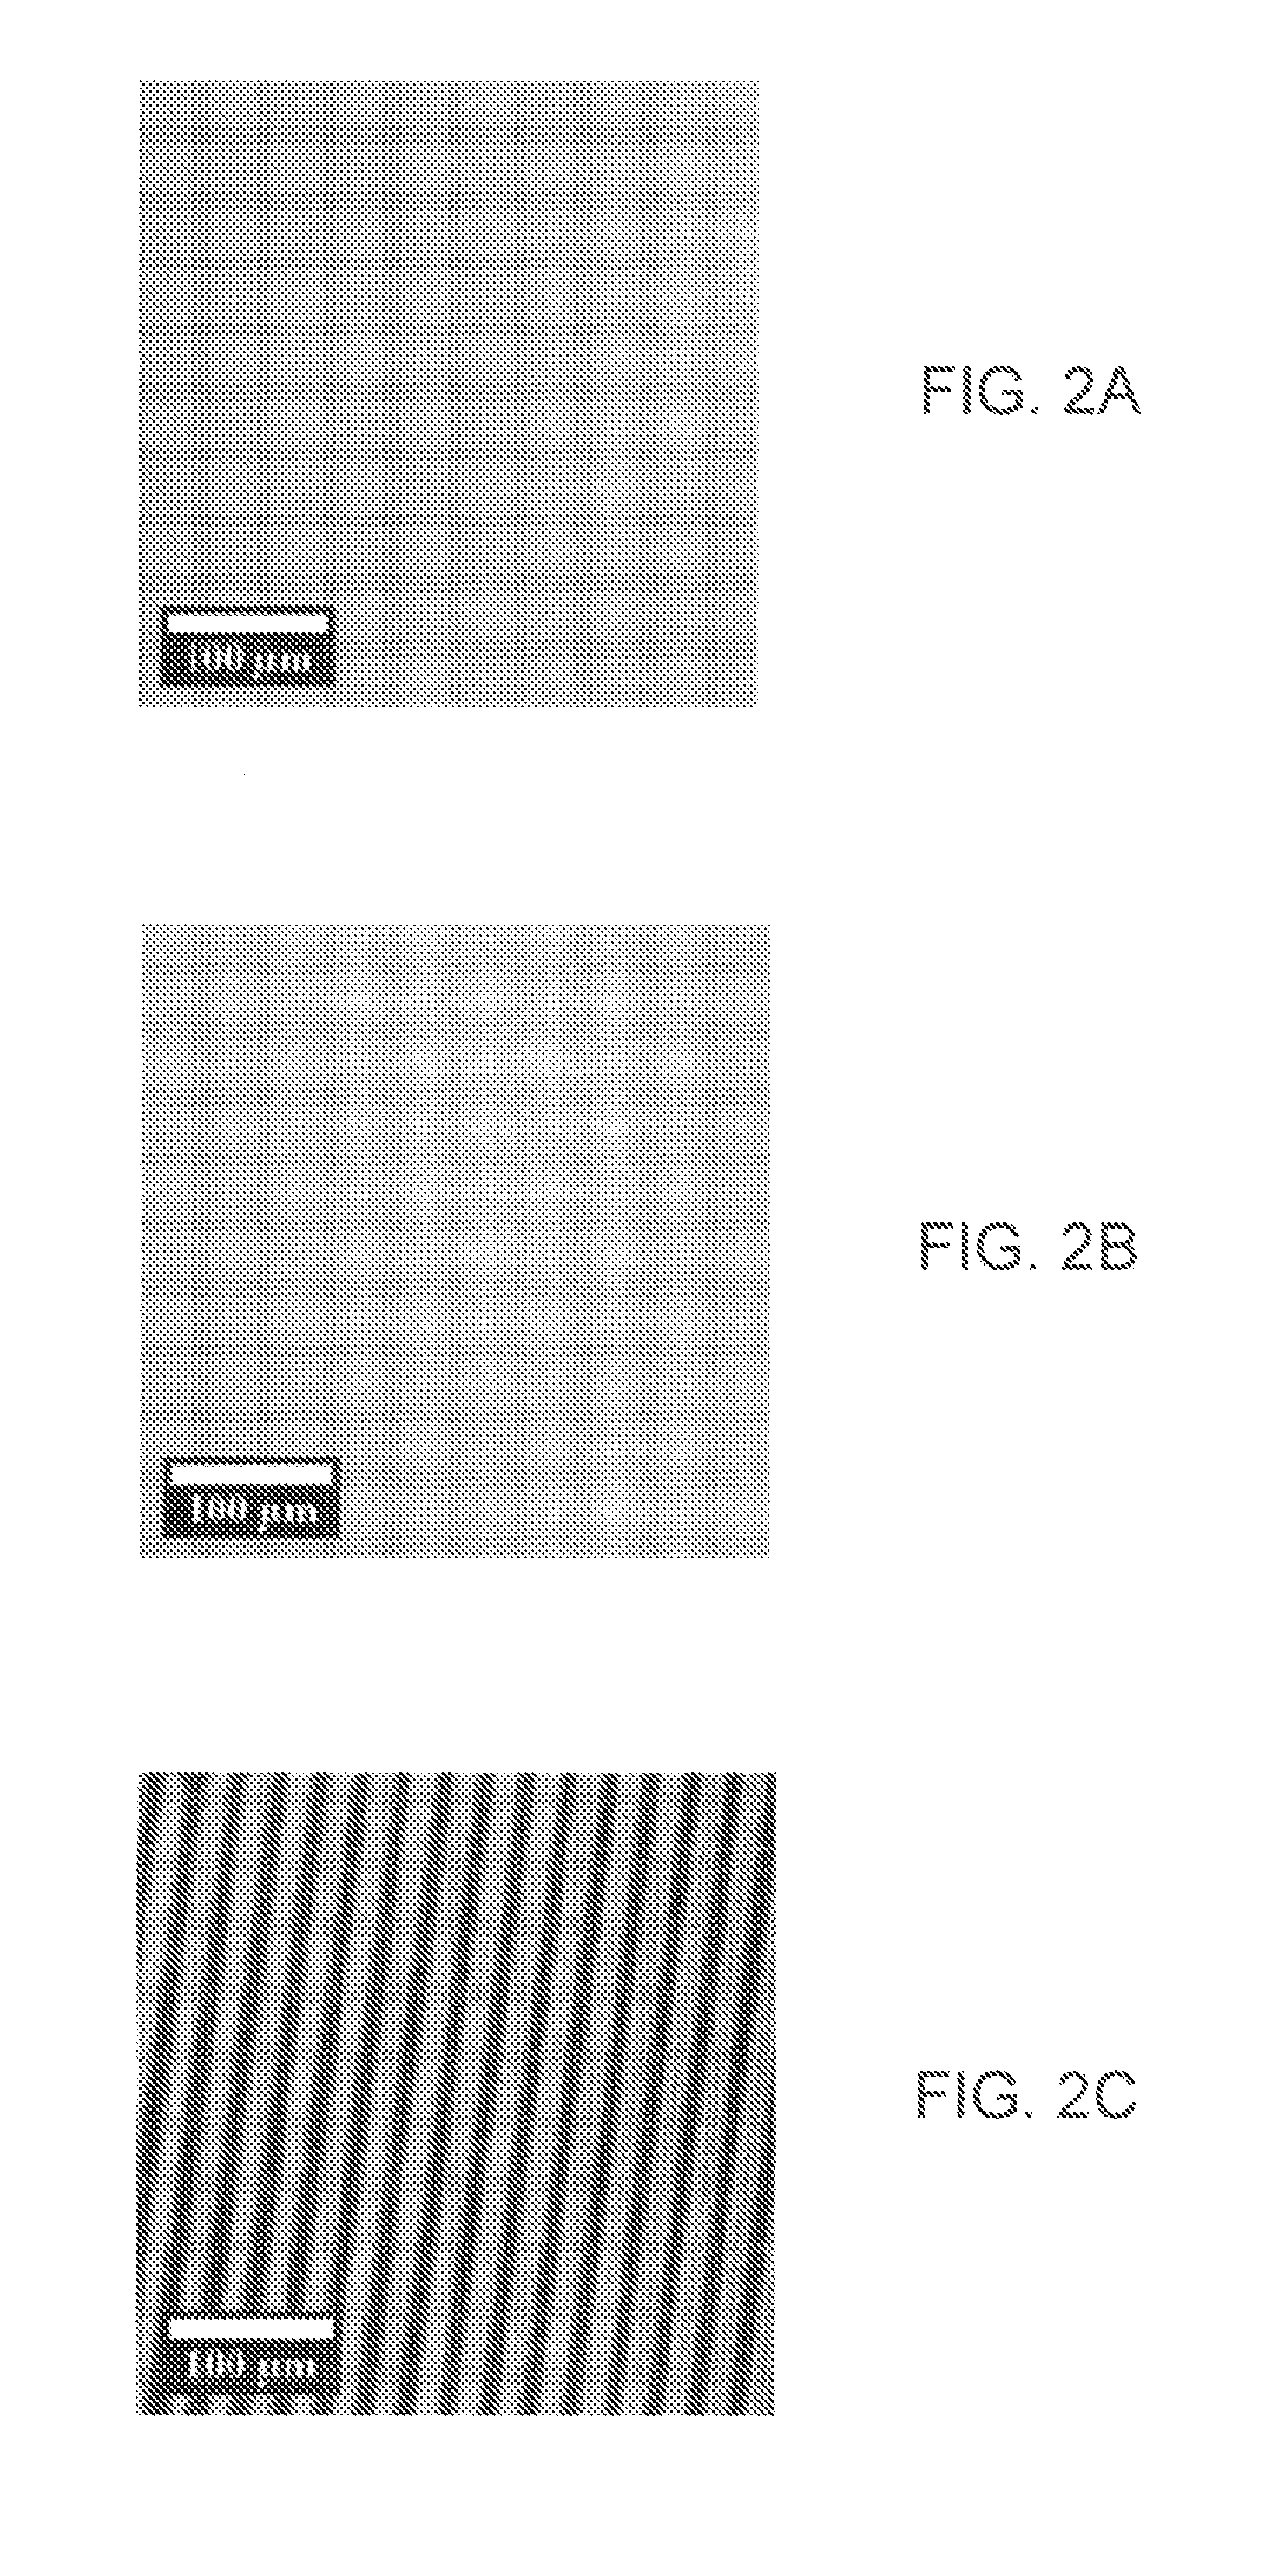 Method for creating topographical patterns in polymers via surface energy patterned films and the marangoni effect